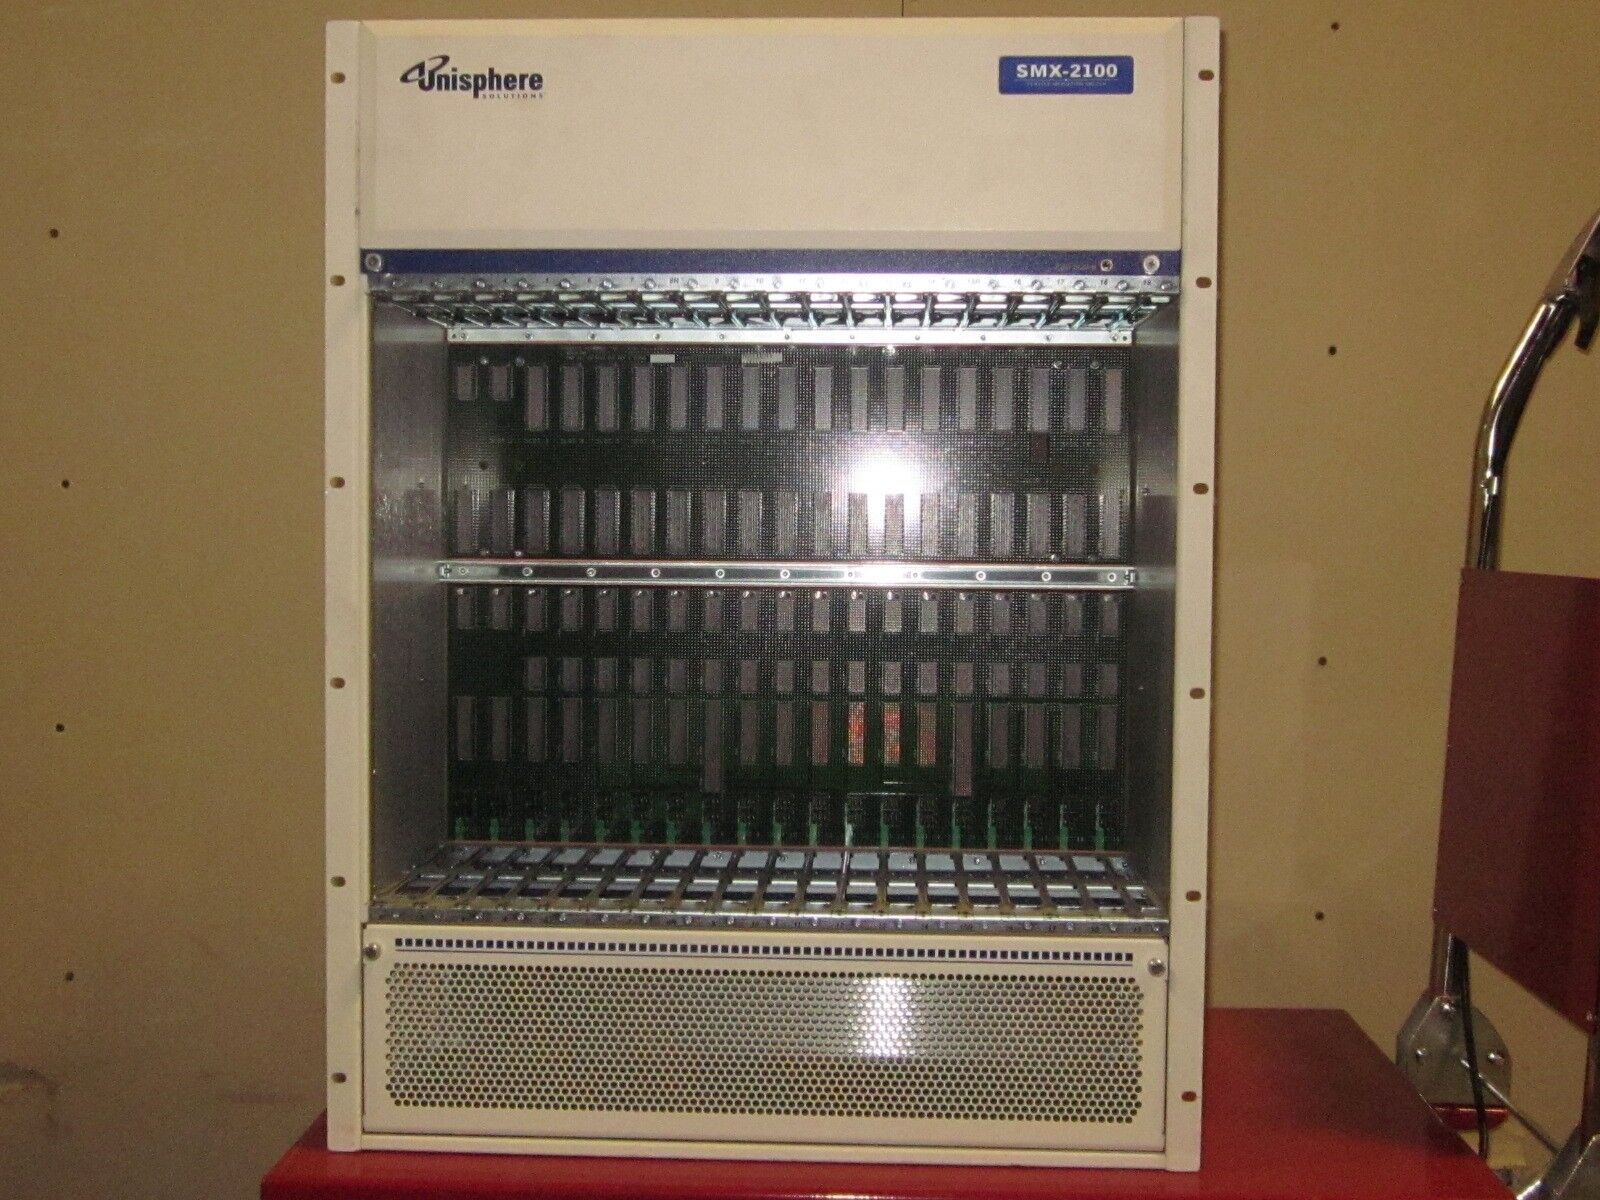 UNISPHERE SOLUTIONS (JUNIPER) SMX-2100 SERVICE MEDIATION SWITCH CHASSIS